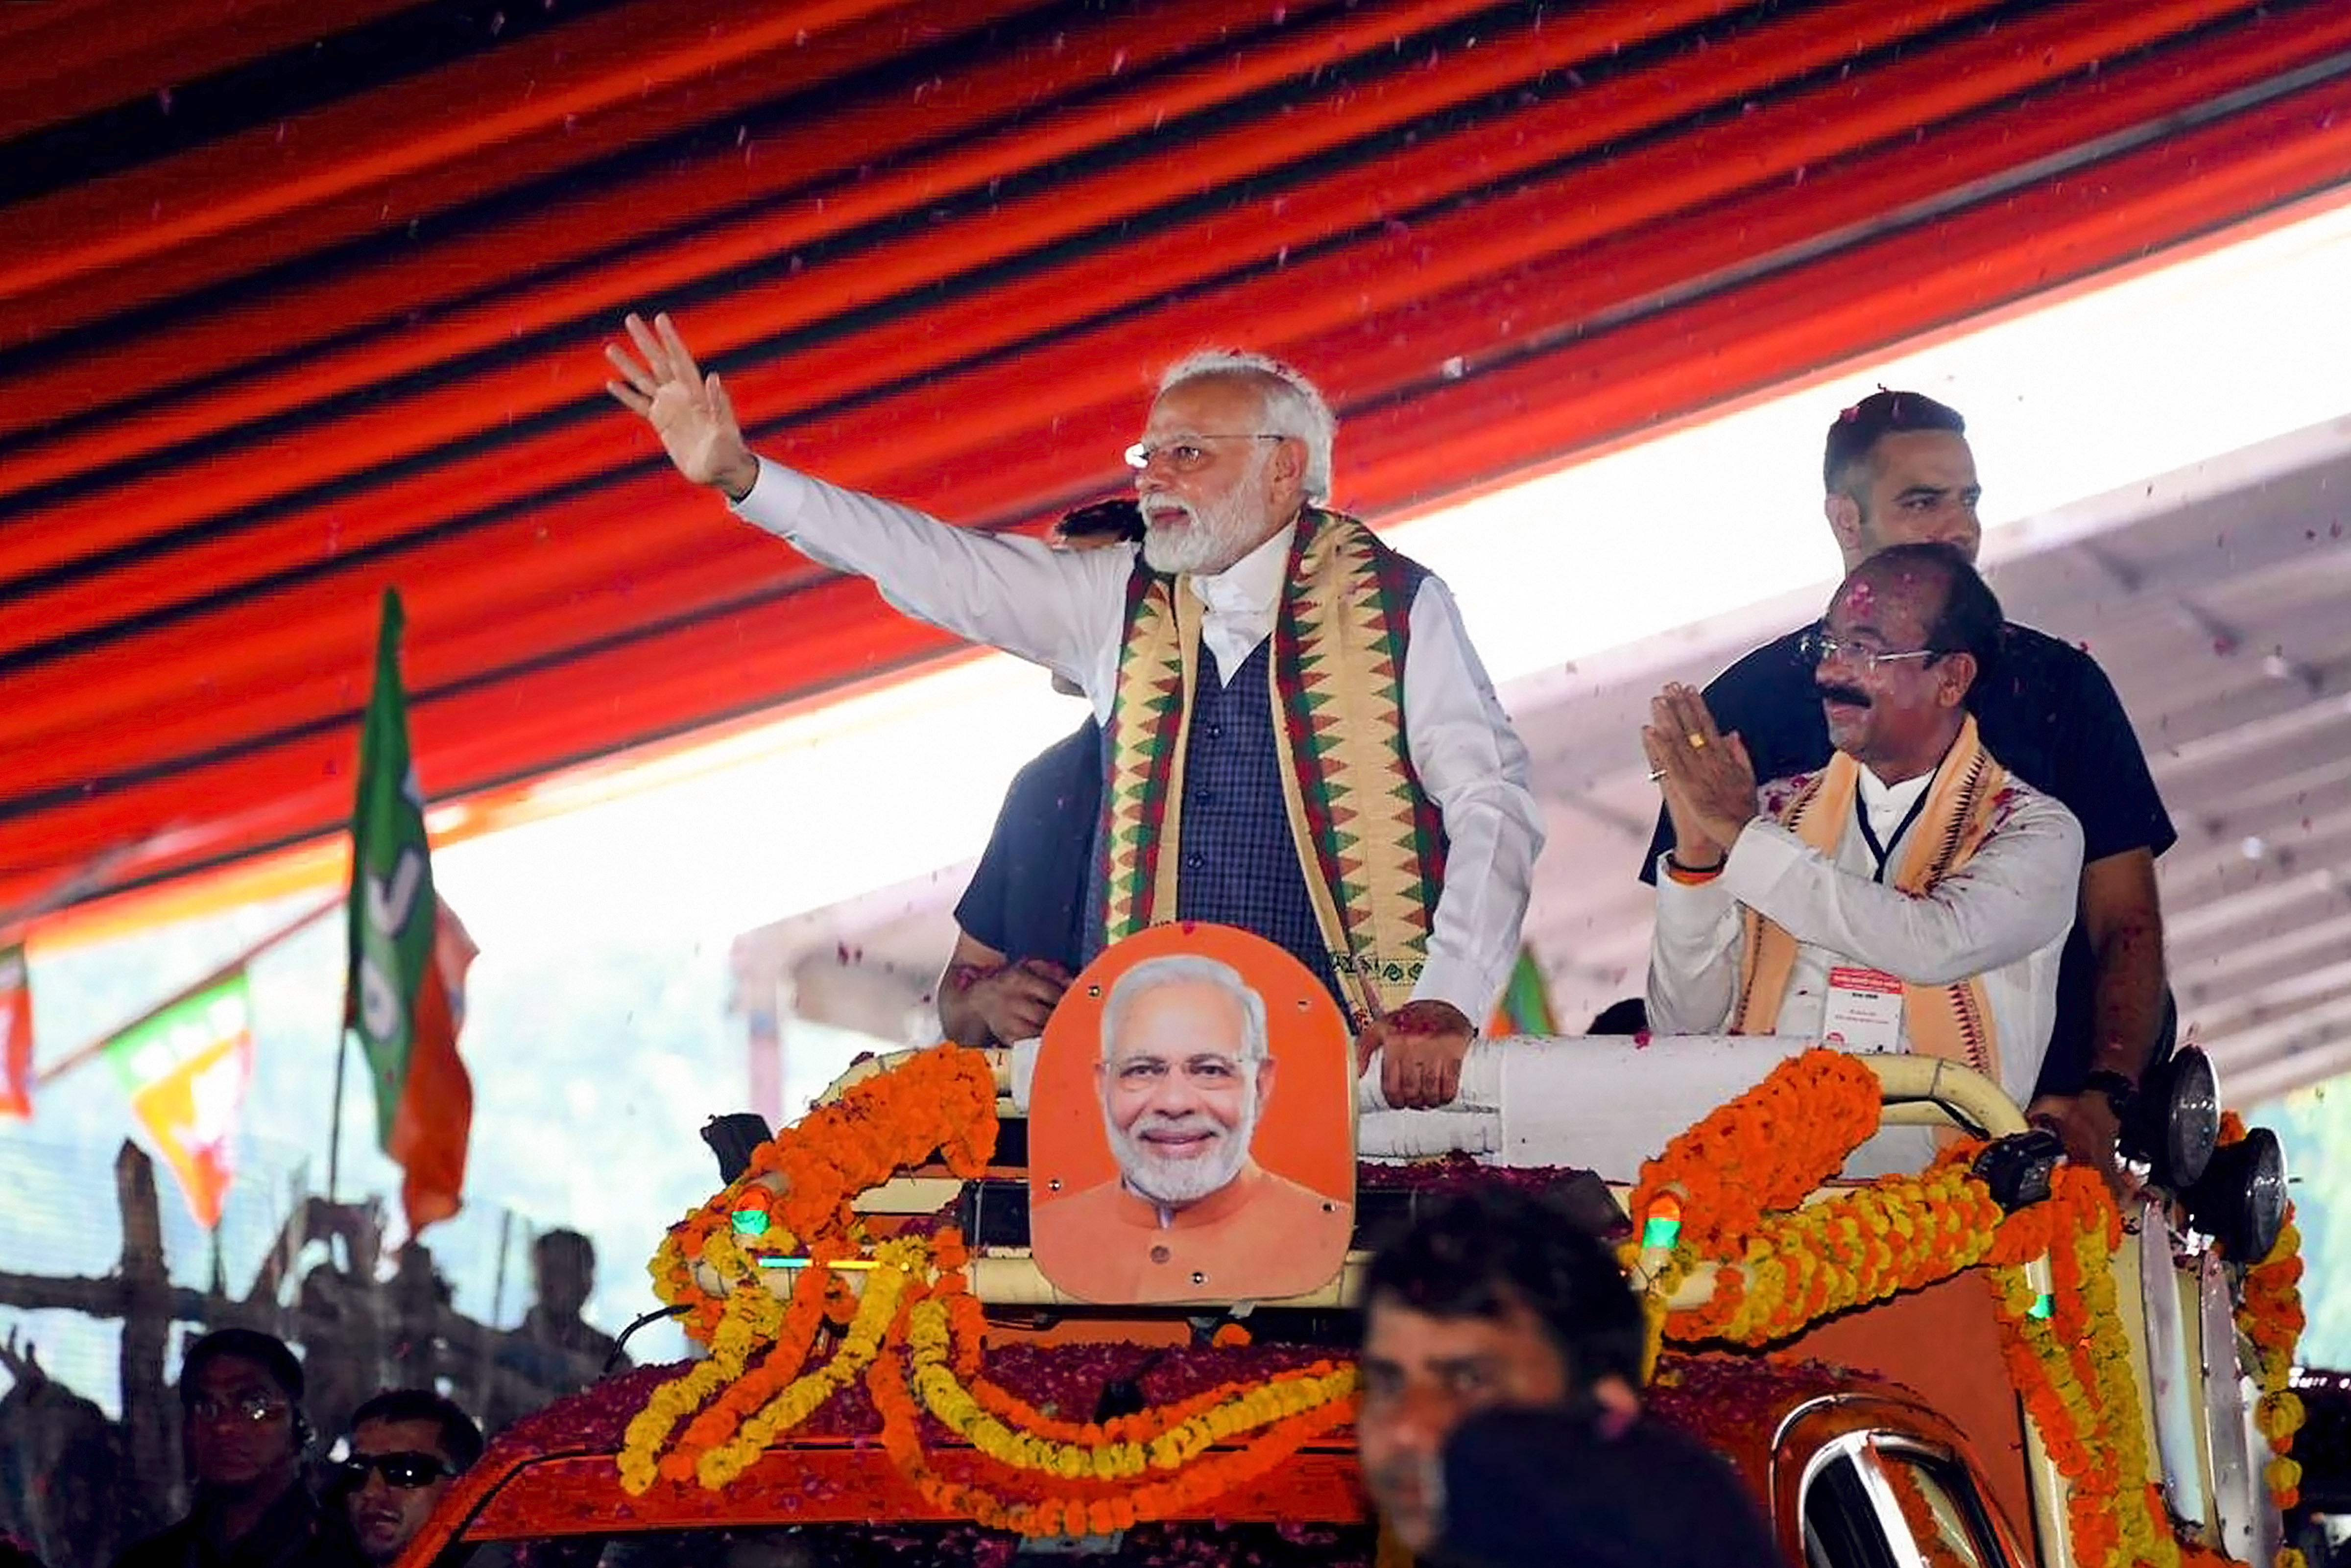 PM Modi to visit Madhya Pradesh, Rajasthan on October 2, to launch multiple development projects